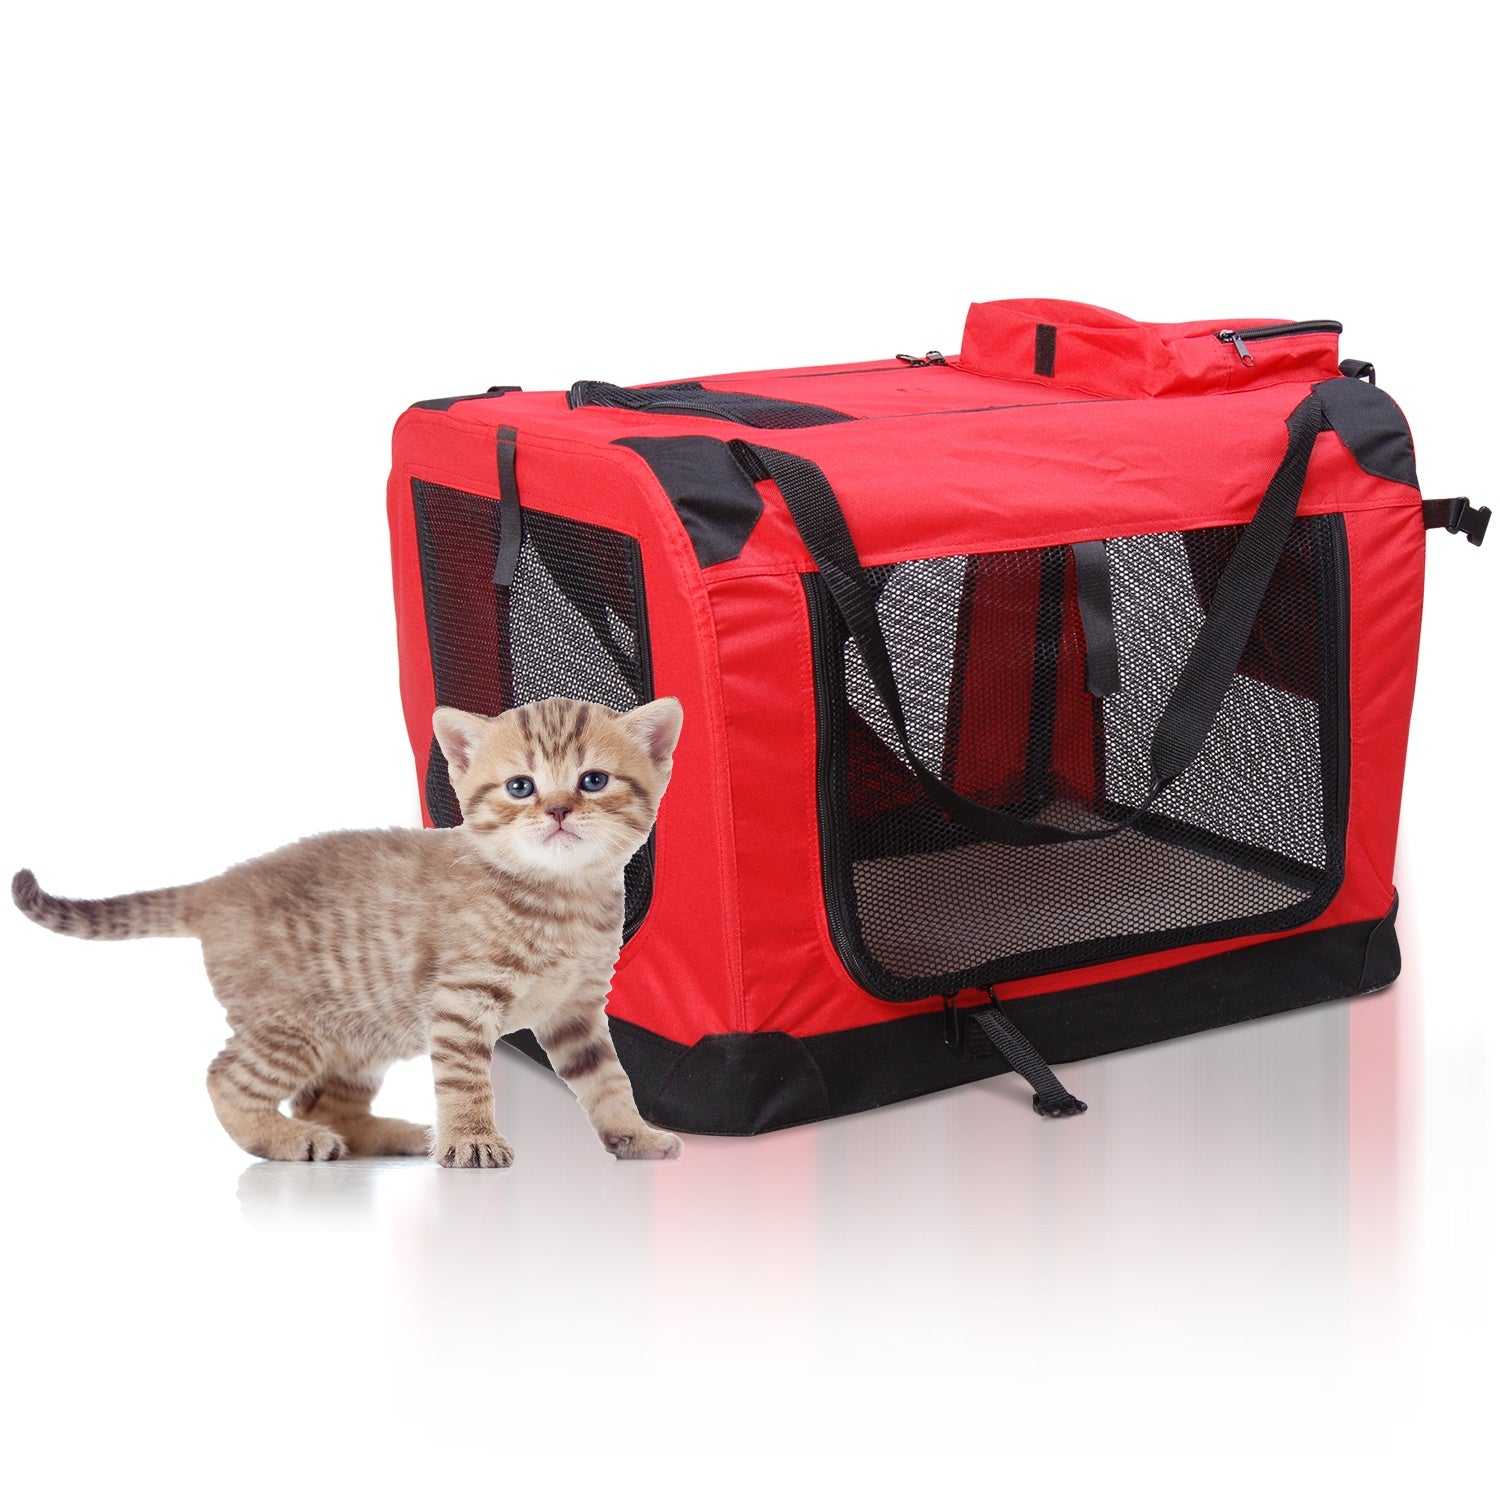 Small Pets PVC Oxford Cloth Travel Carrier w/ Mesh Windows Red